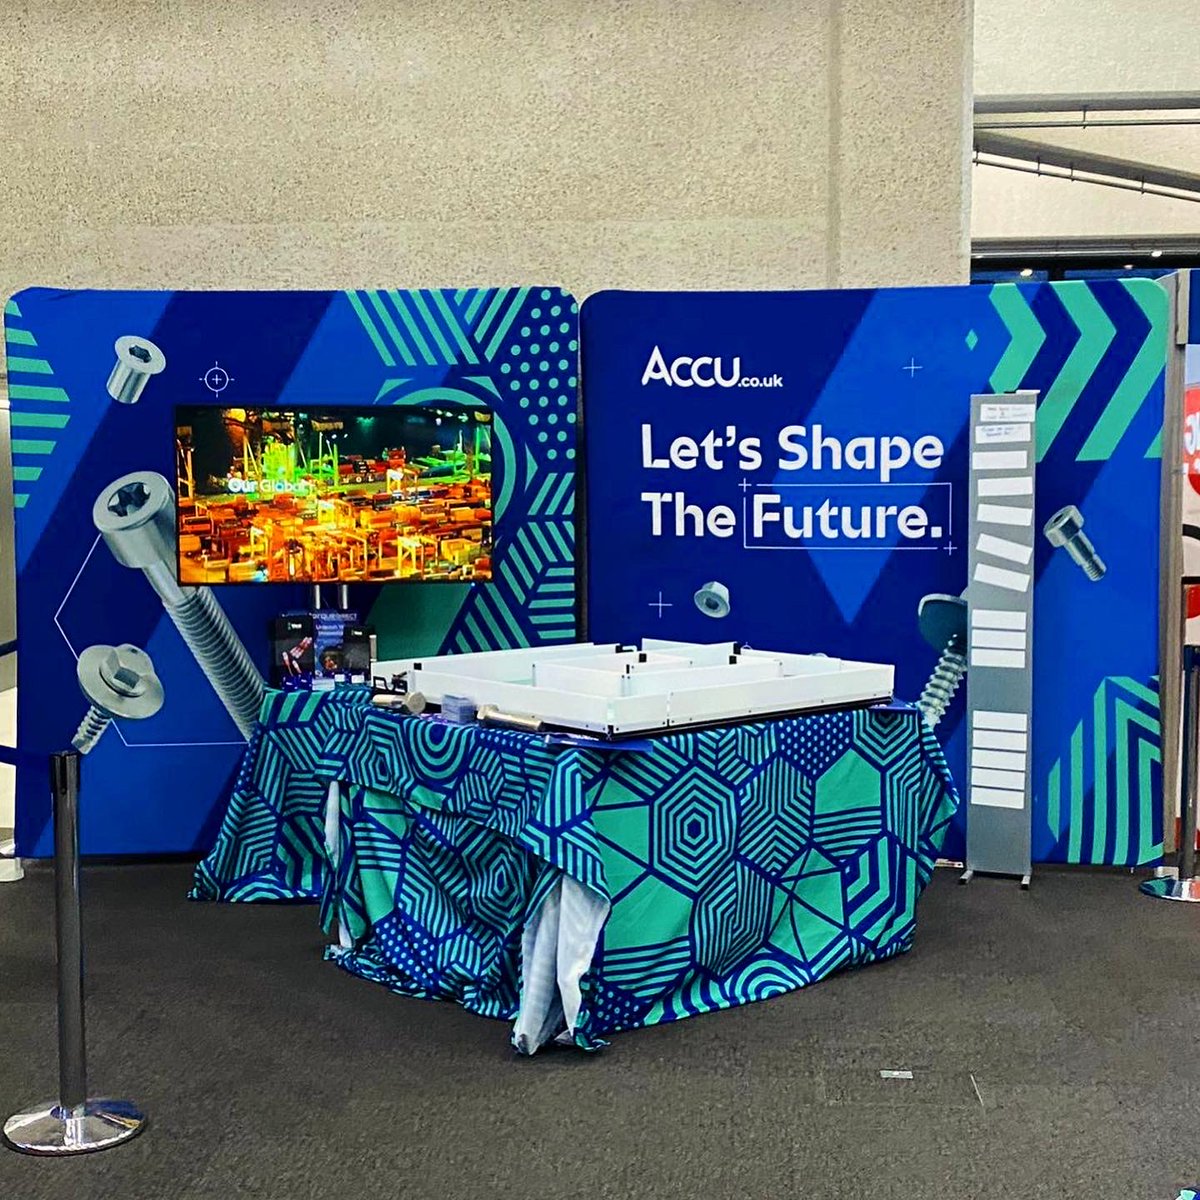 Come find us today at the QEII Centre and become our Robot Maze Challenge Champion!

#MakeUK2024 #MakeUK #NMD2024 #Manufacturing #BritishManufacturing #Conference #London #Maze #Game #WeraTools

(5/5)